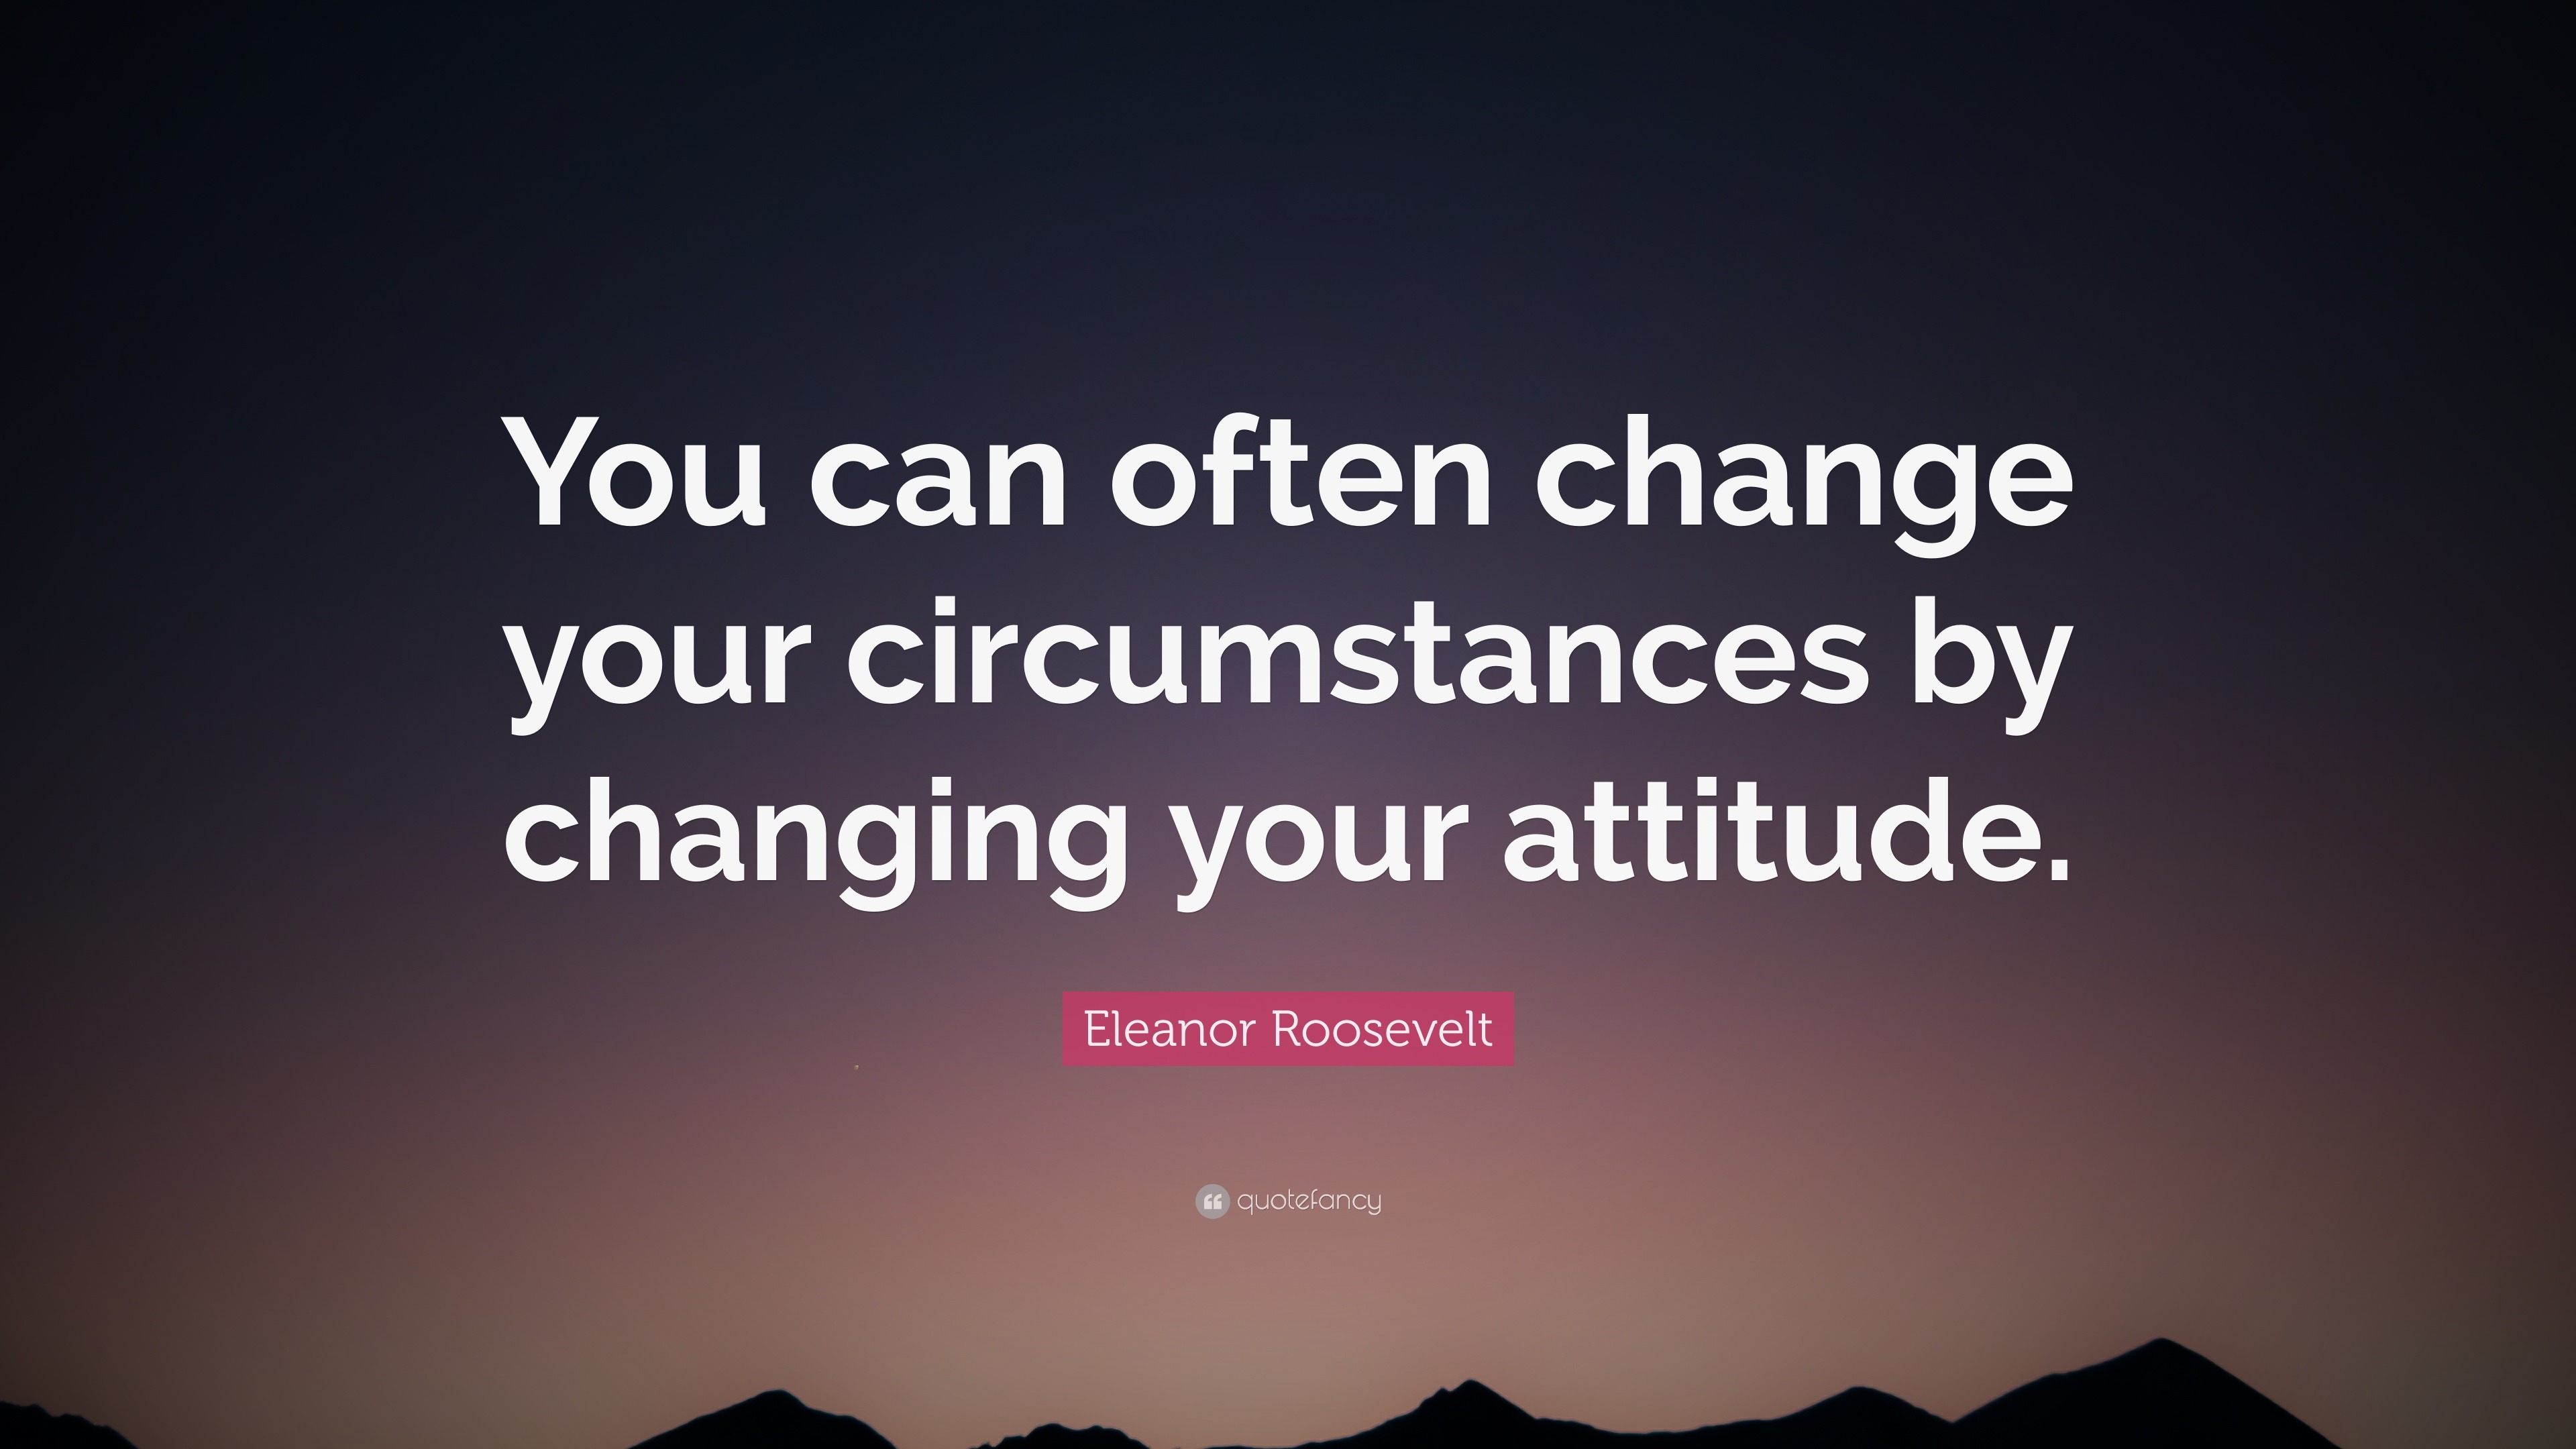 Eleanor Roosevelt Quote: “You can often change your circumstances by ...